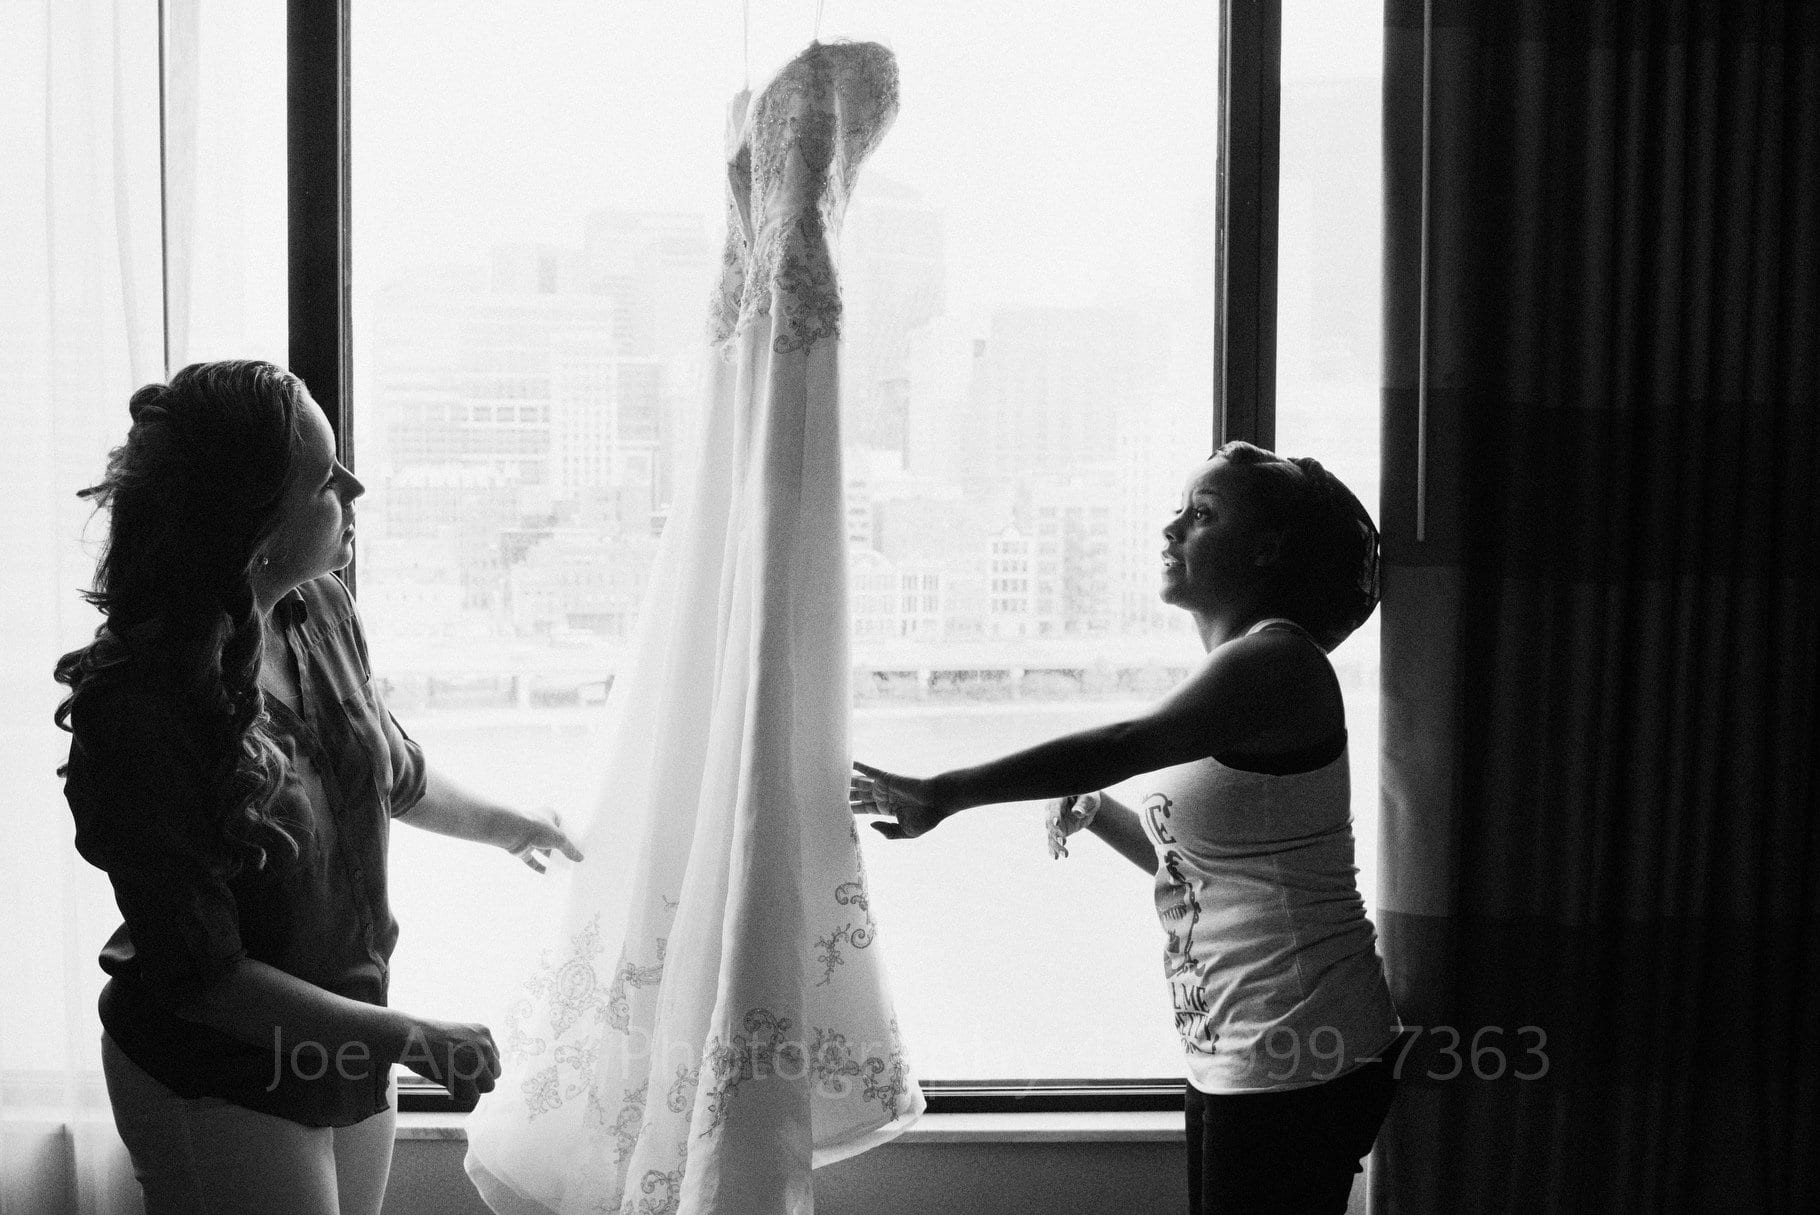 A bride and bridesmaid smooth out the wrinkles on a wedding dress hanging in the window of a hotel room.